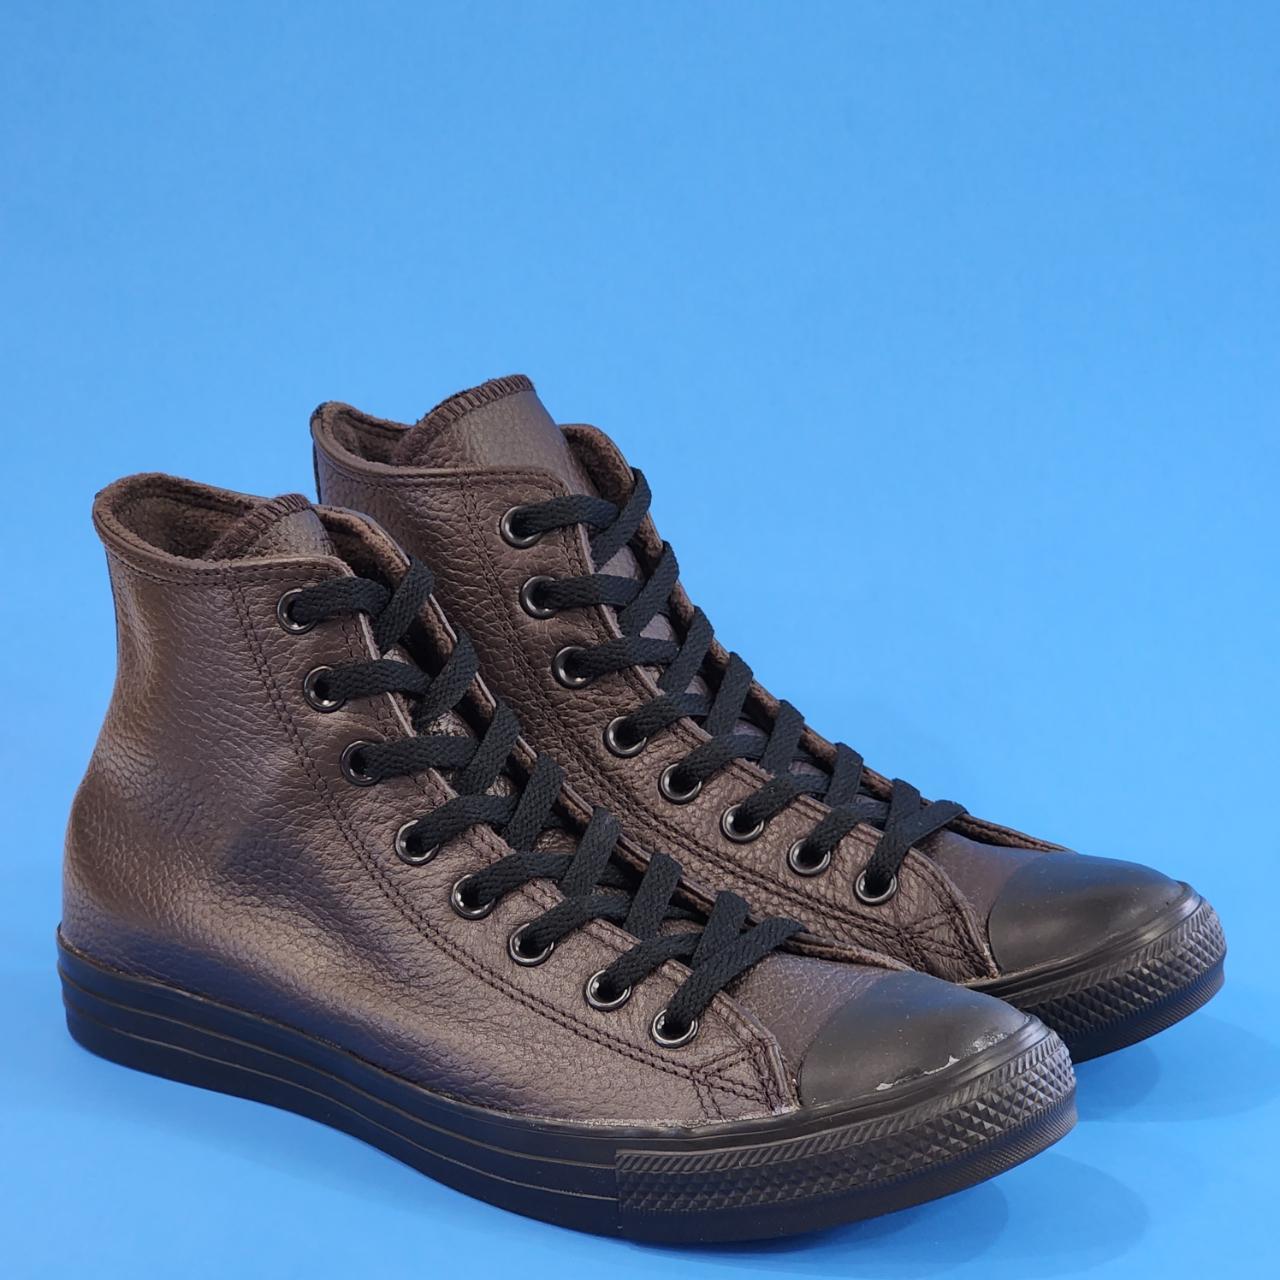 Converse Men's Brown and Black Trainers | Depop